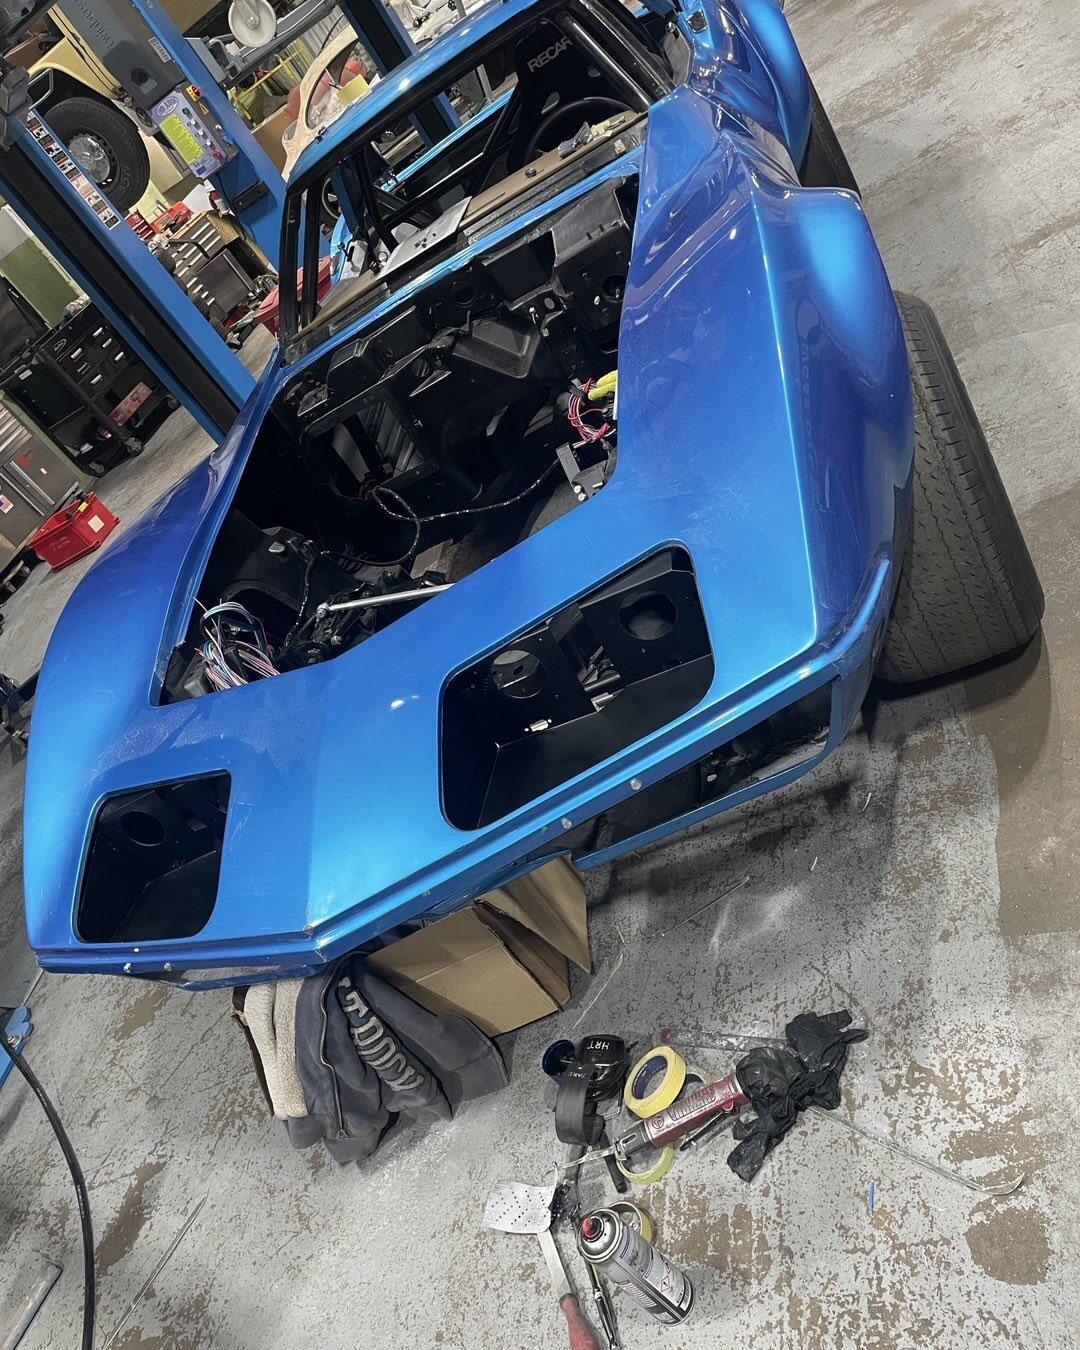 We are loving working on this very cool 69 race Corvette